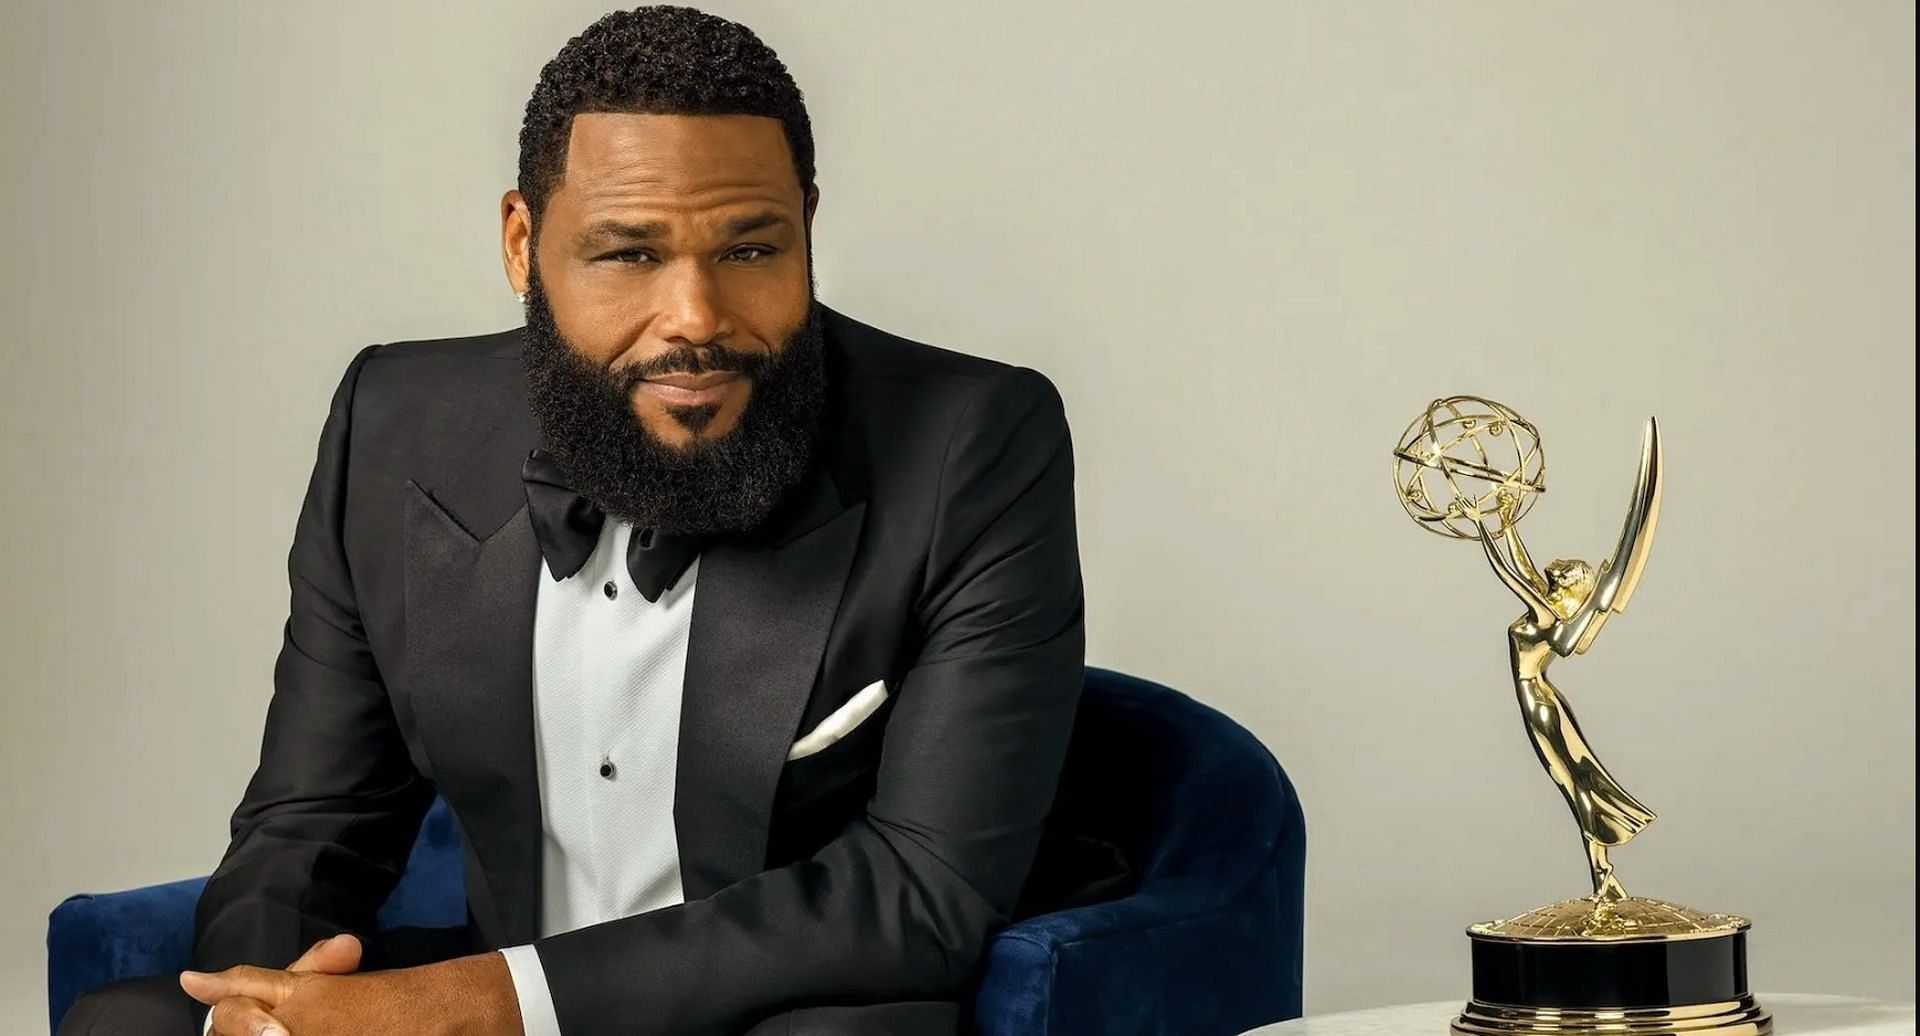 Anthony Anderson will be hosting the 75th Primetime Emmy Awards (Image via FOX)